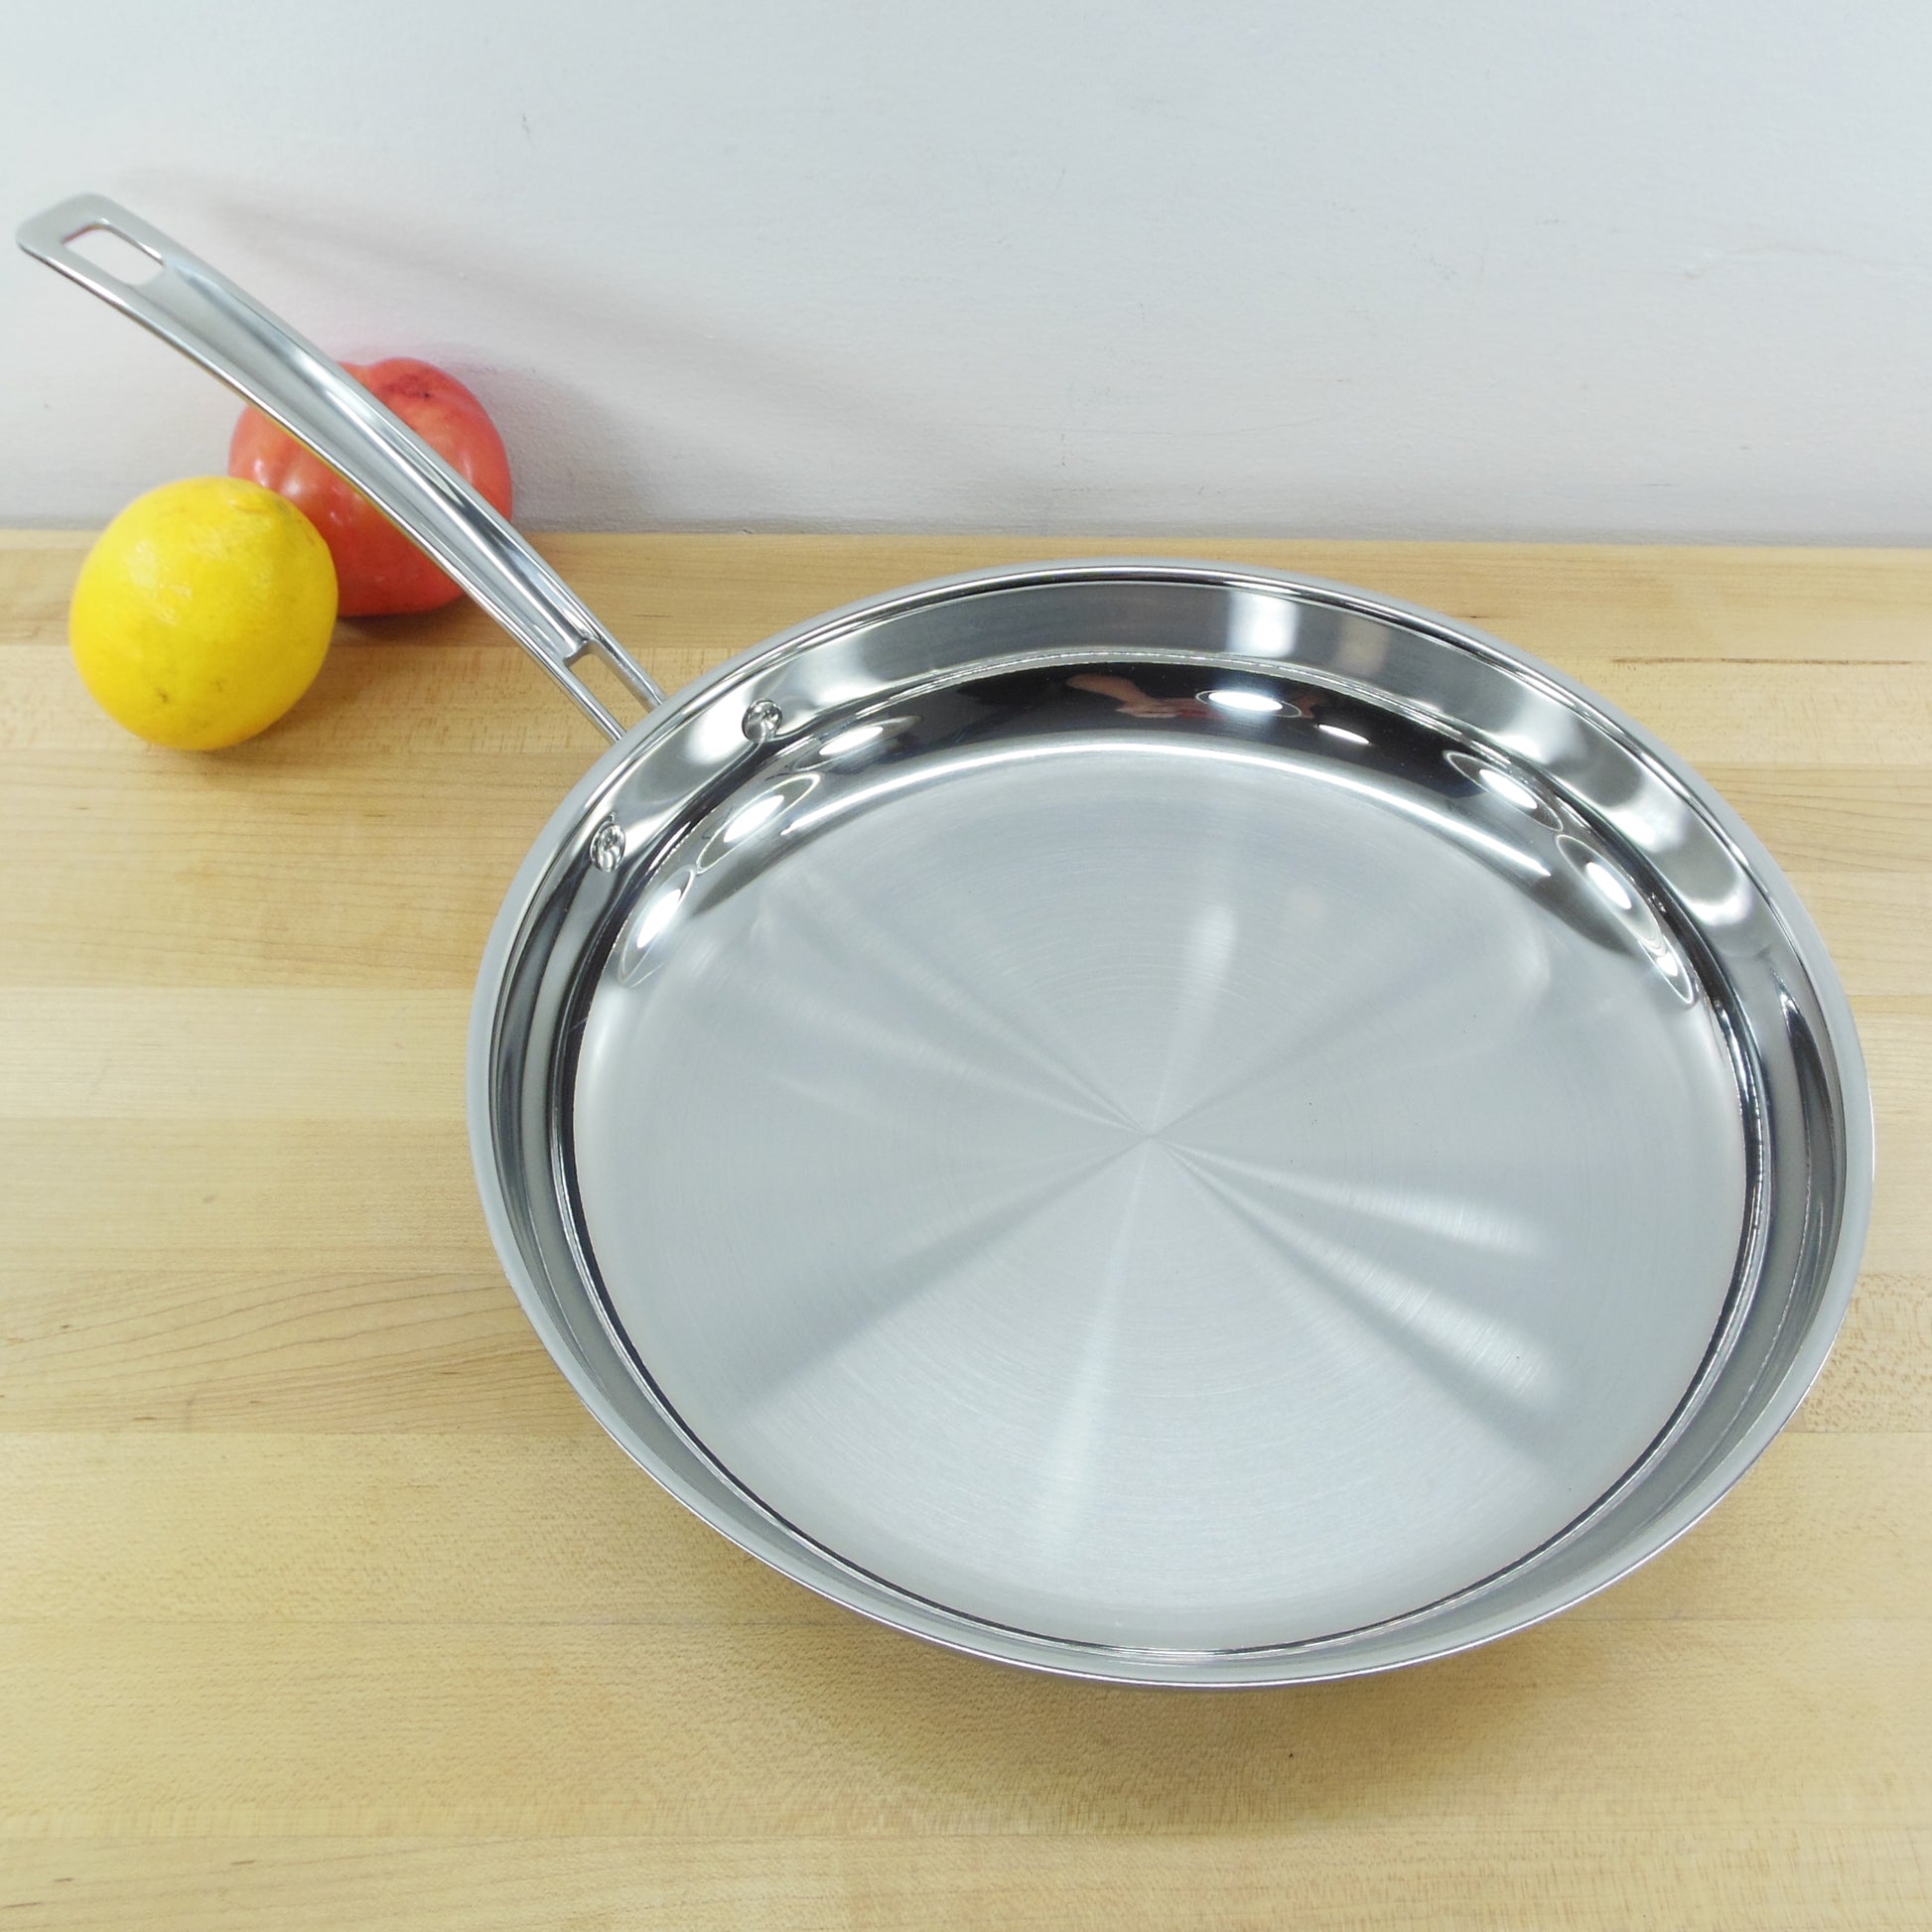 Cuisinart Induction Ready Stainless 12" Fry Pan Skillet 73122-30